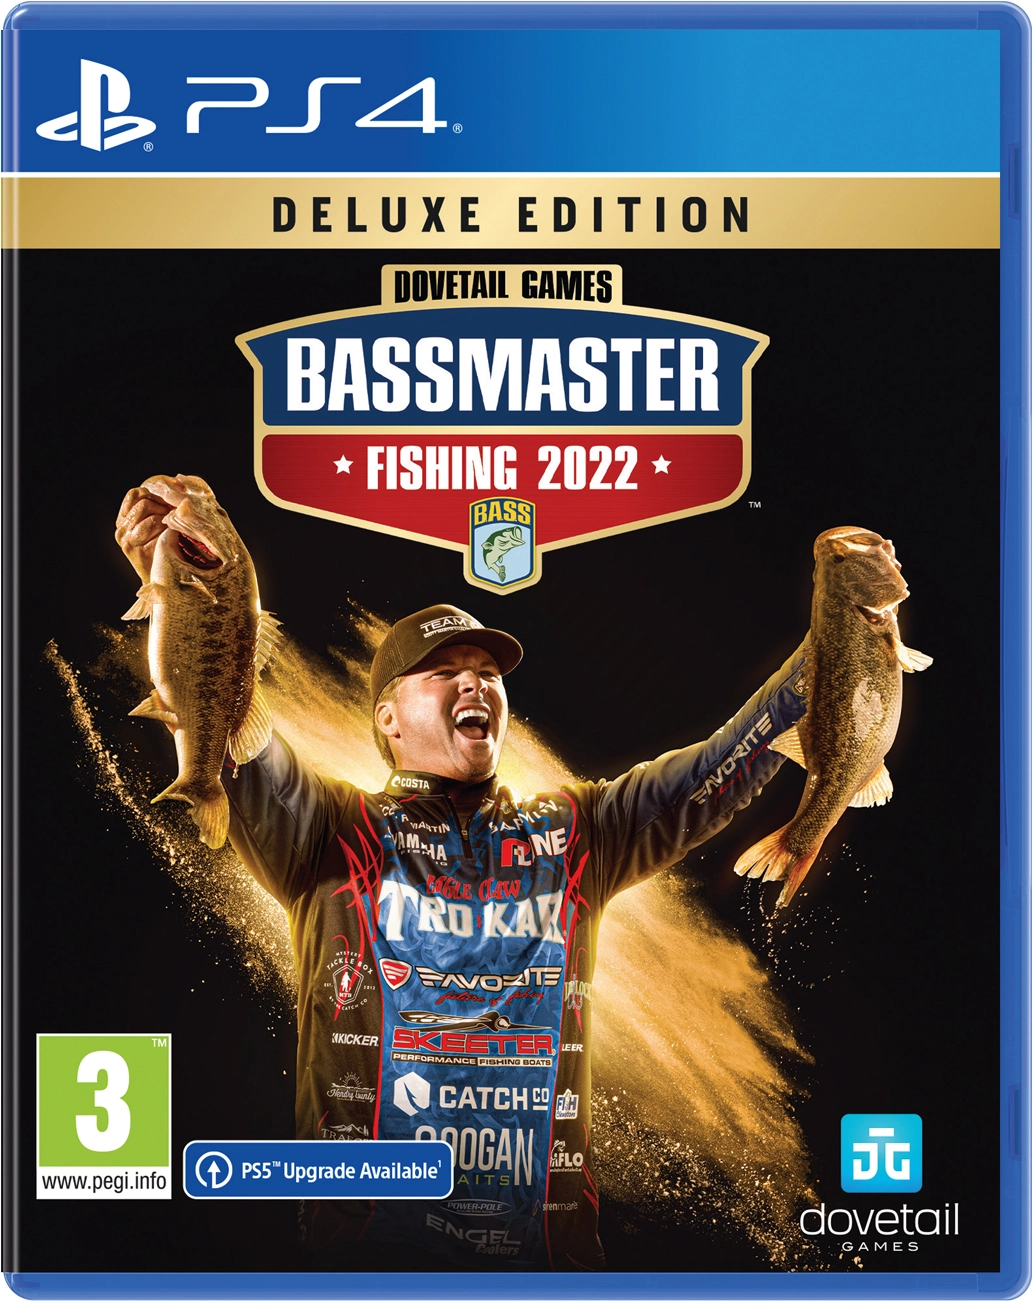 Bassmaster Fishing 2022 - Deluxe Edition (PS4), Dovetail Games